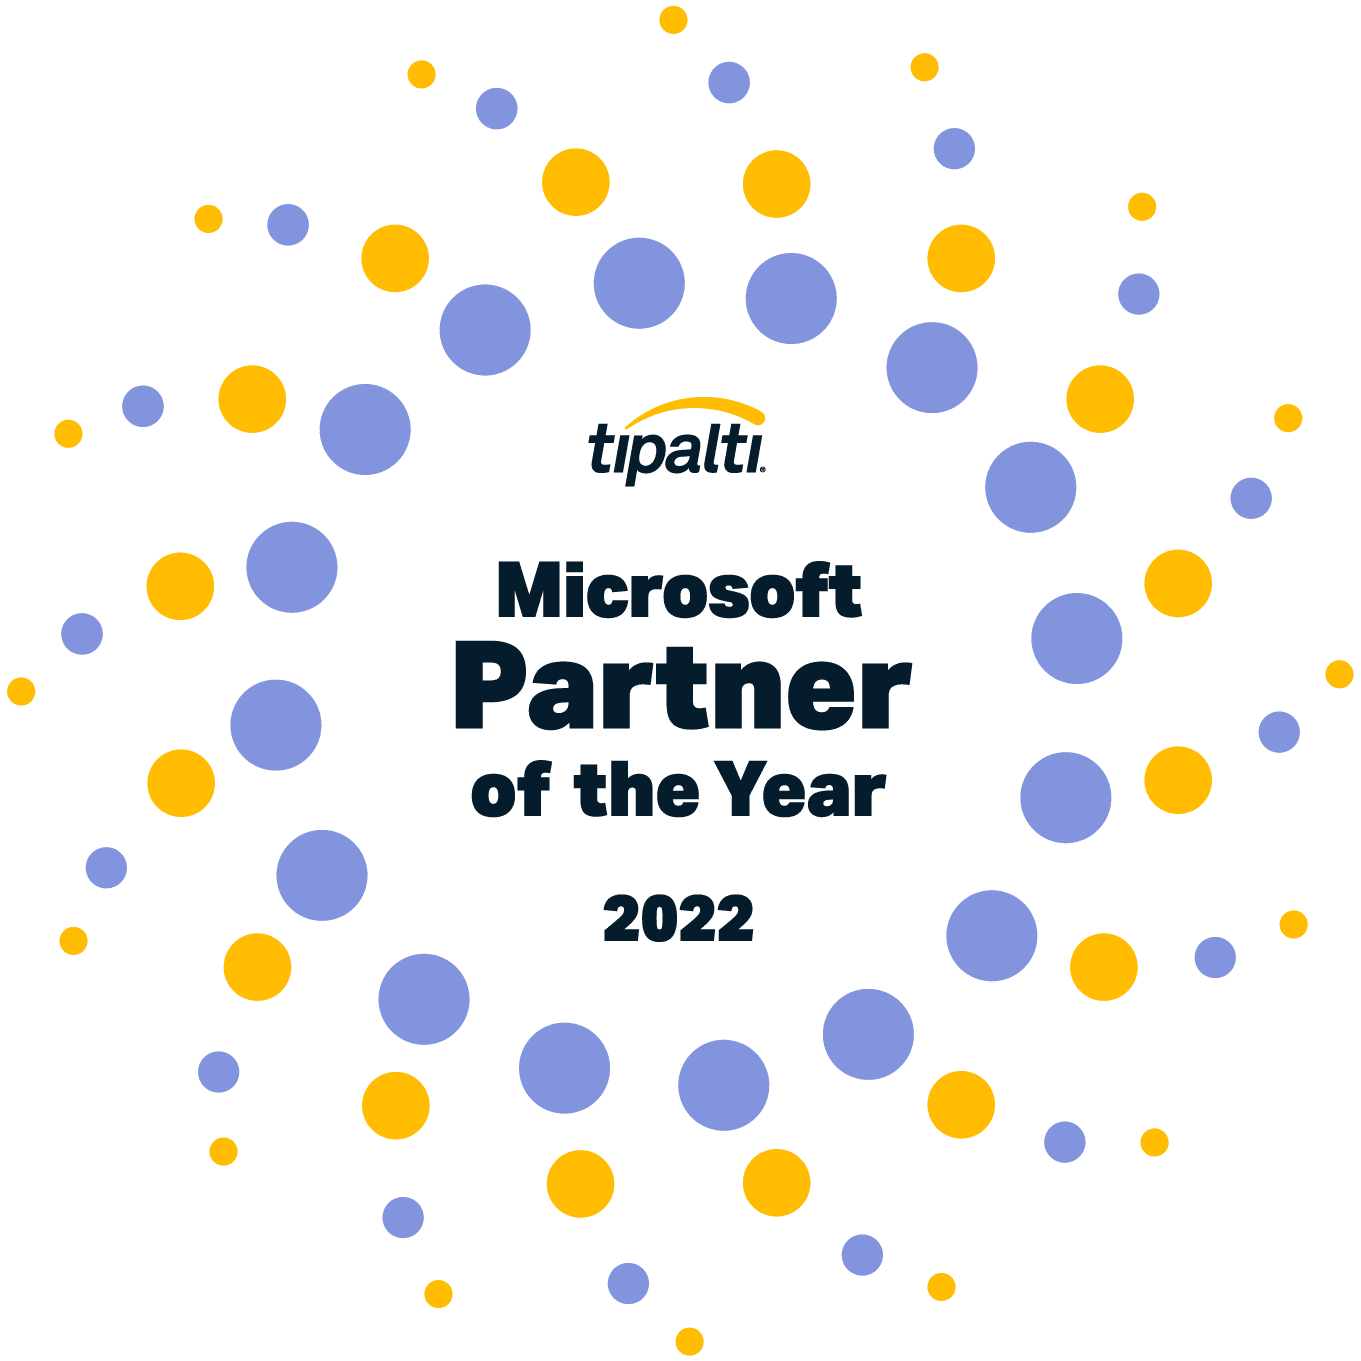 Tipalti Microsoft Partner of the Year